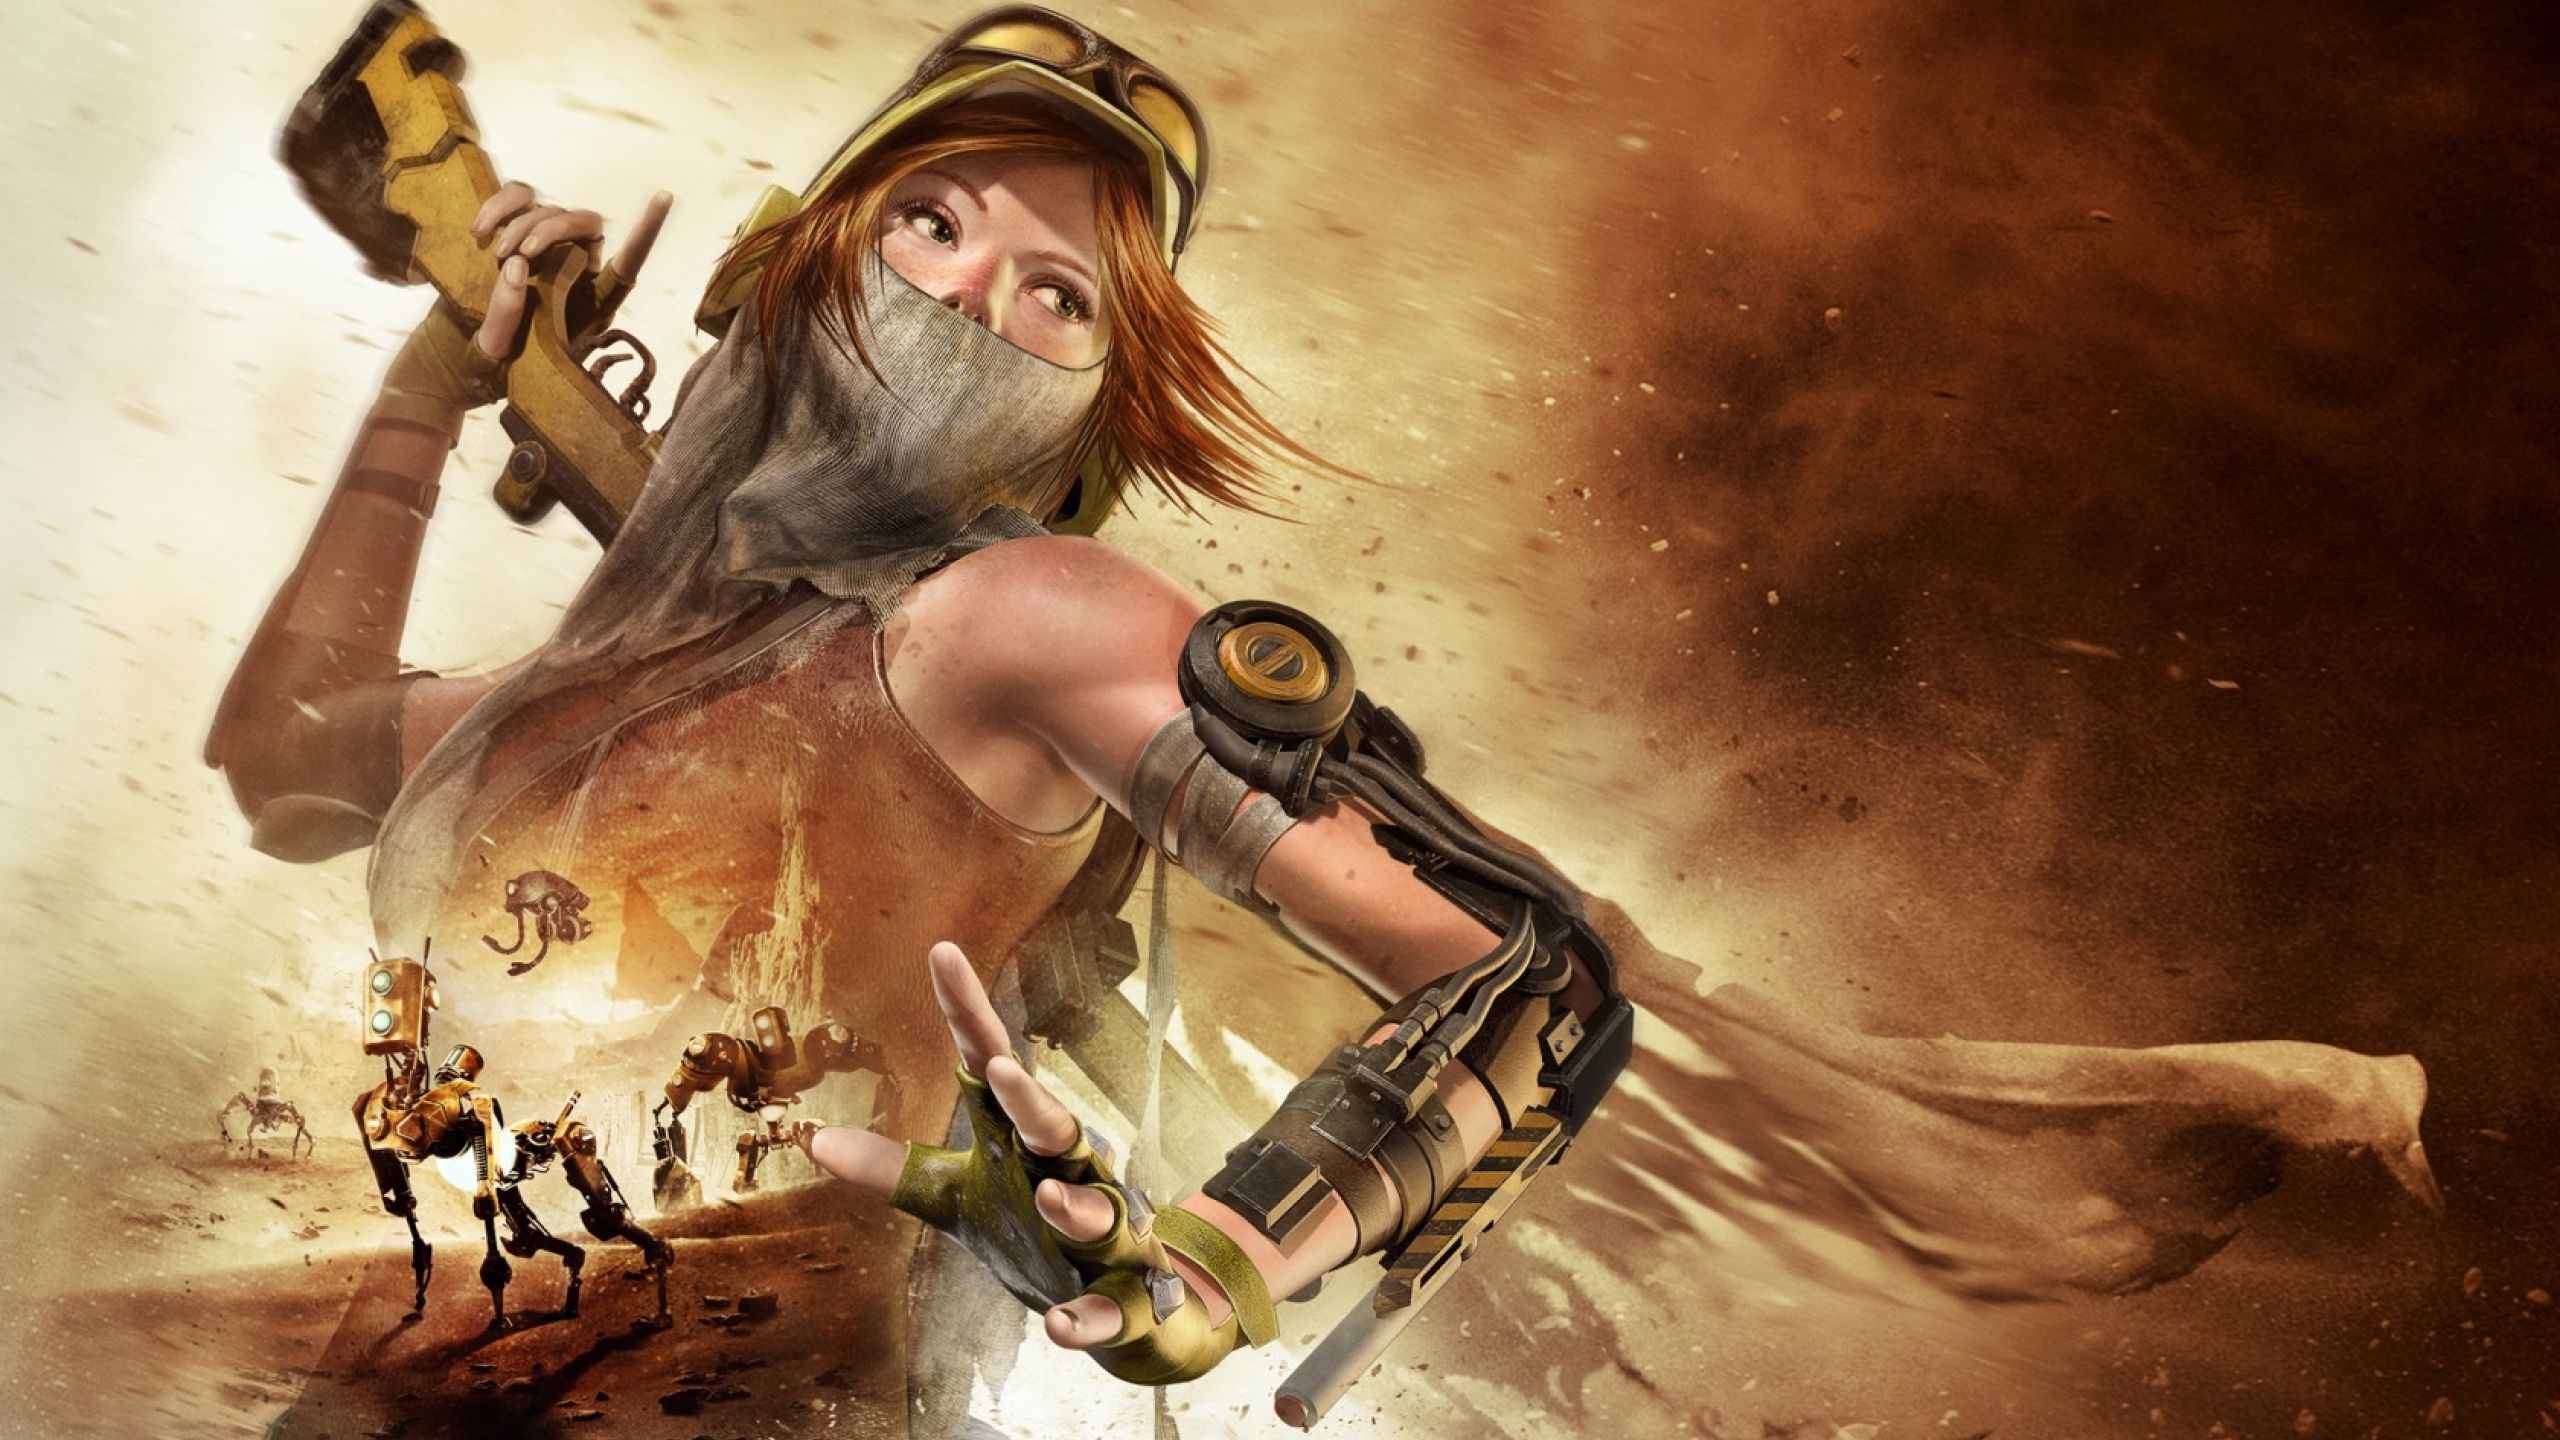 2560x1440 recore, game, girl 1440P Resolution Wallpaper, HD Games 4K Wallpapers, Image, Photos and Backgrounds